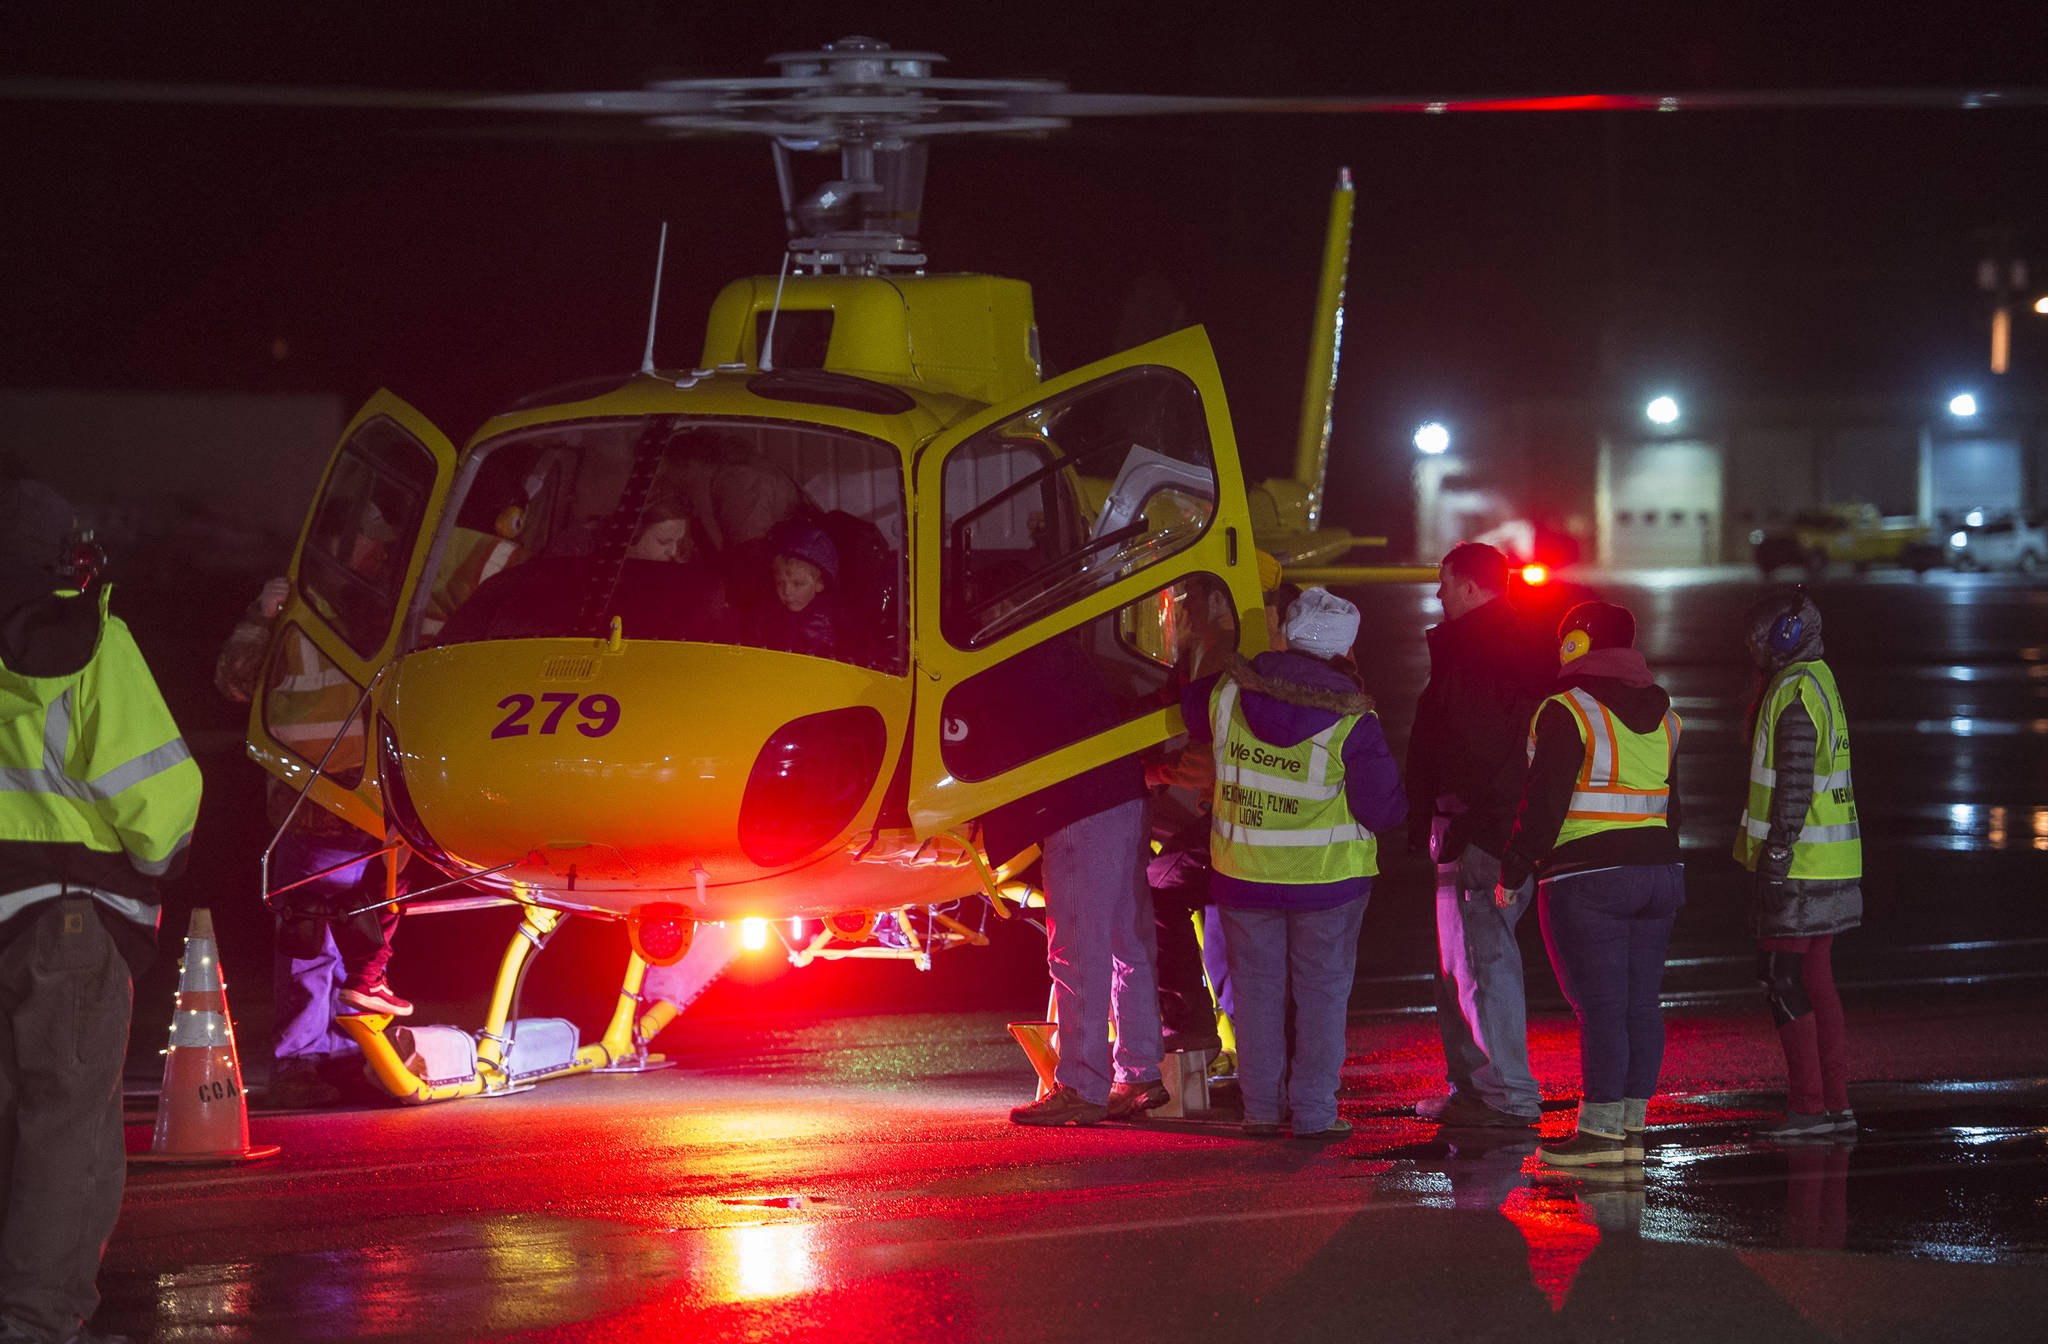 Juneauites board a Coastal Helicopter for the annual Christmas Lights Flights at the Juneau International Airport on Friday, Dec. 15, 2017. Mendenhall Flying Lions put on the event, which is a fundraiser for the American Children’s Tumor Foundation. Petro Marine Services and Coastal Fuel also support the event. (Michael Penn | Juneau Empire File)